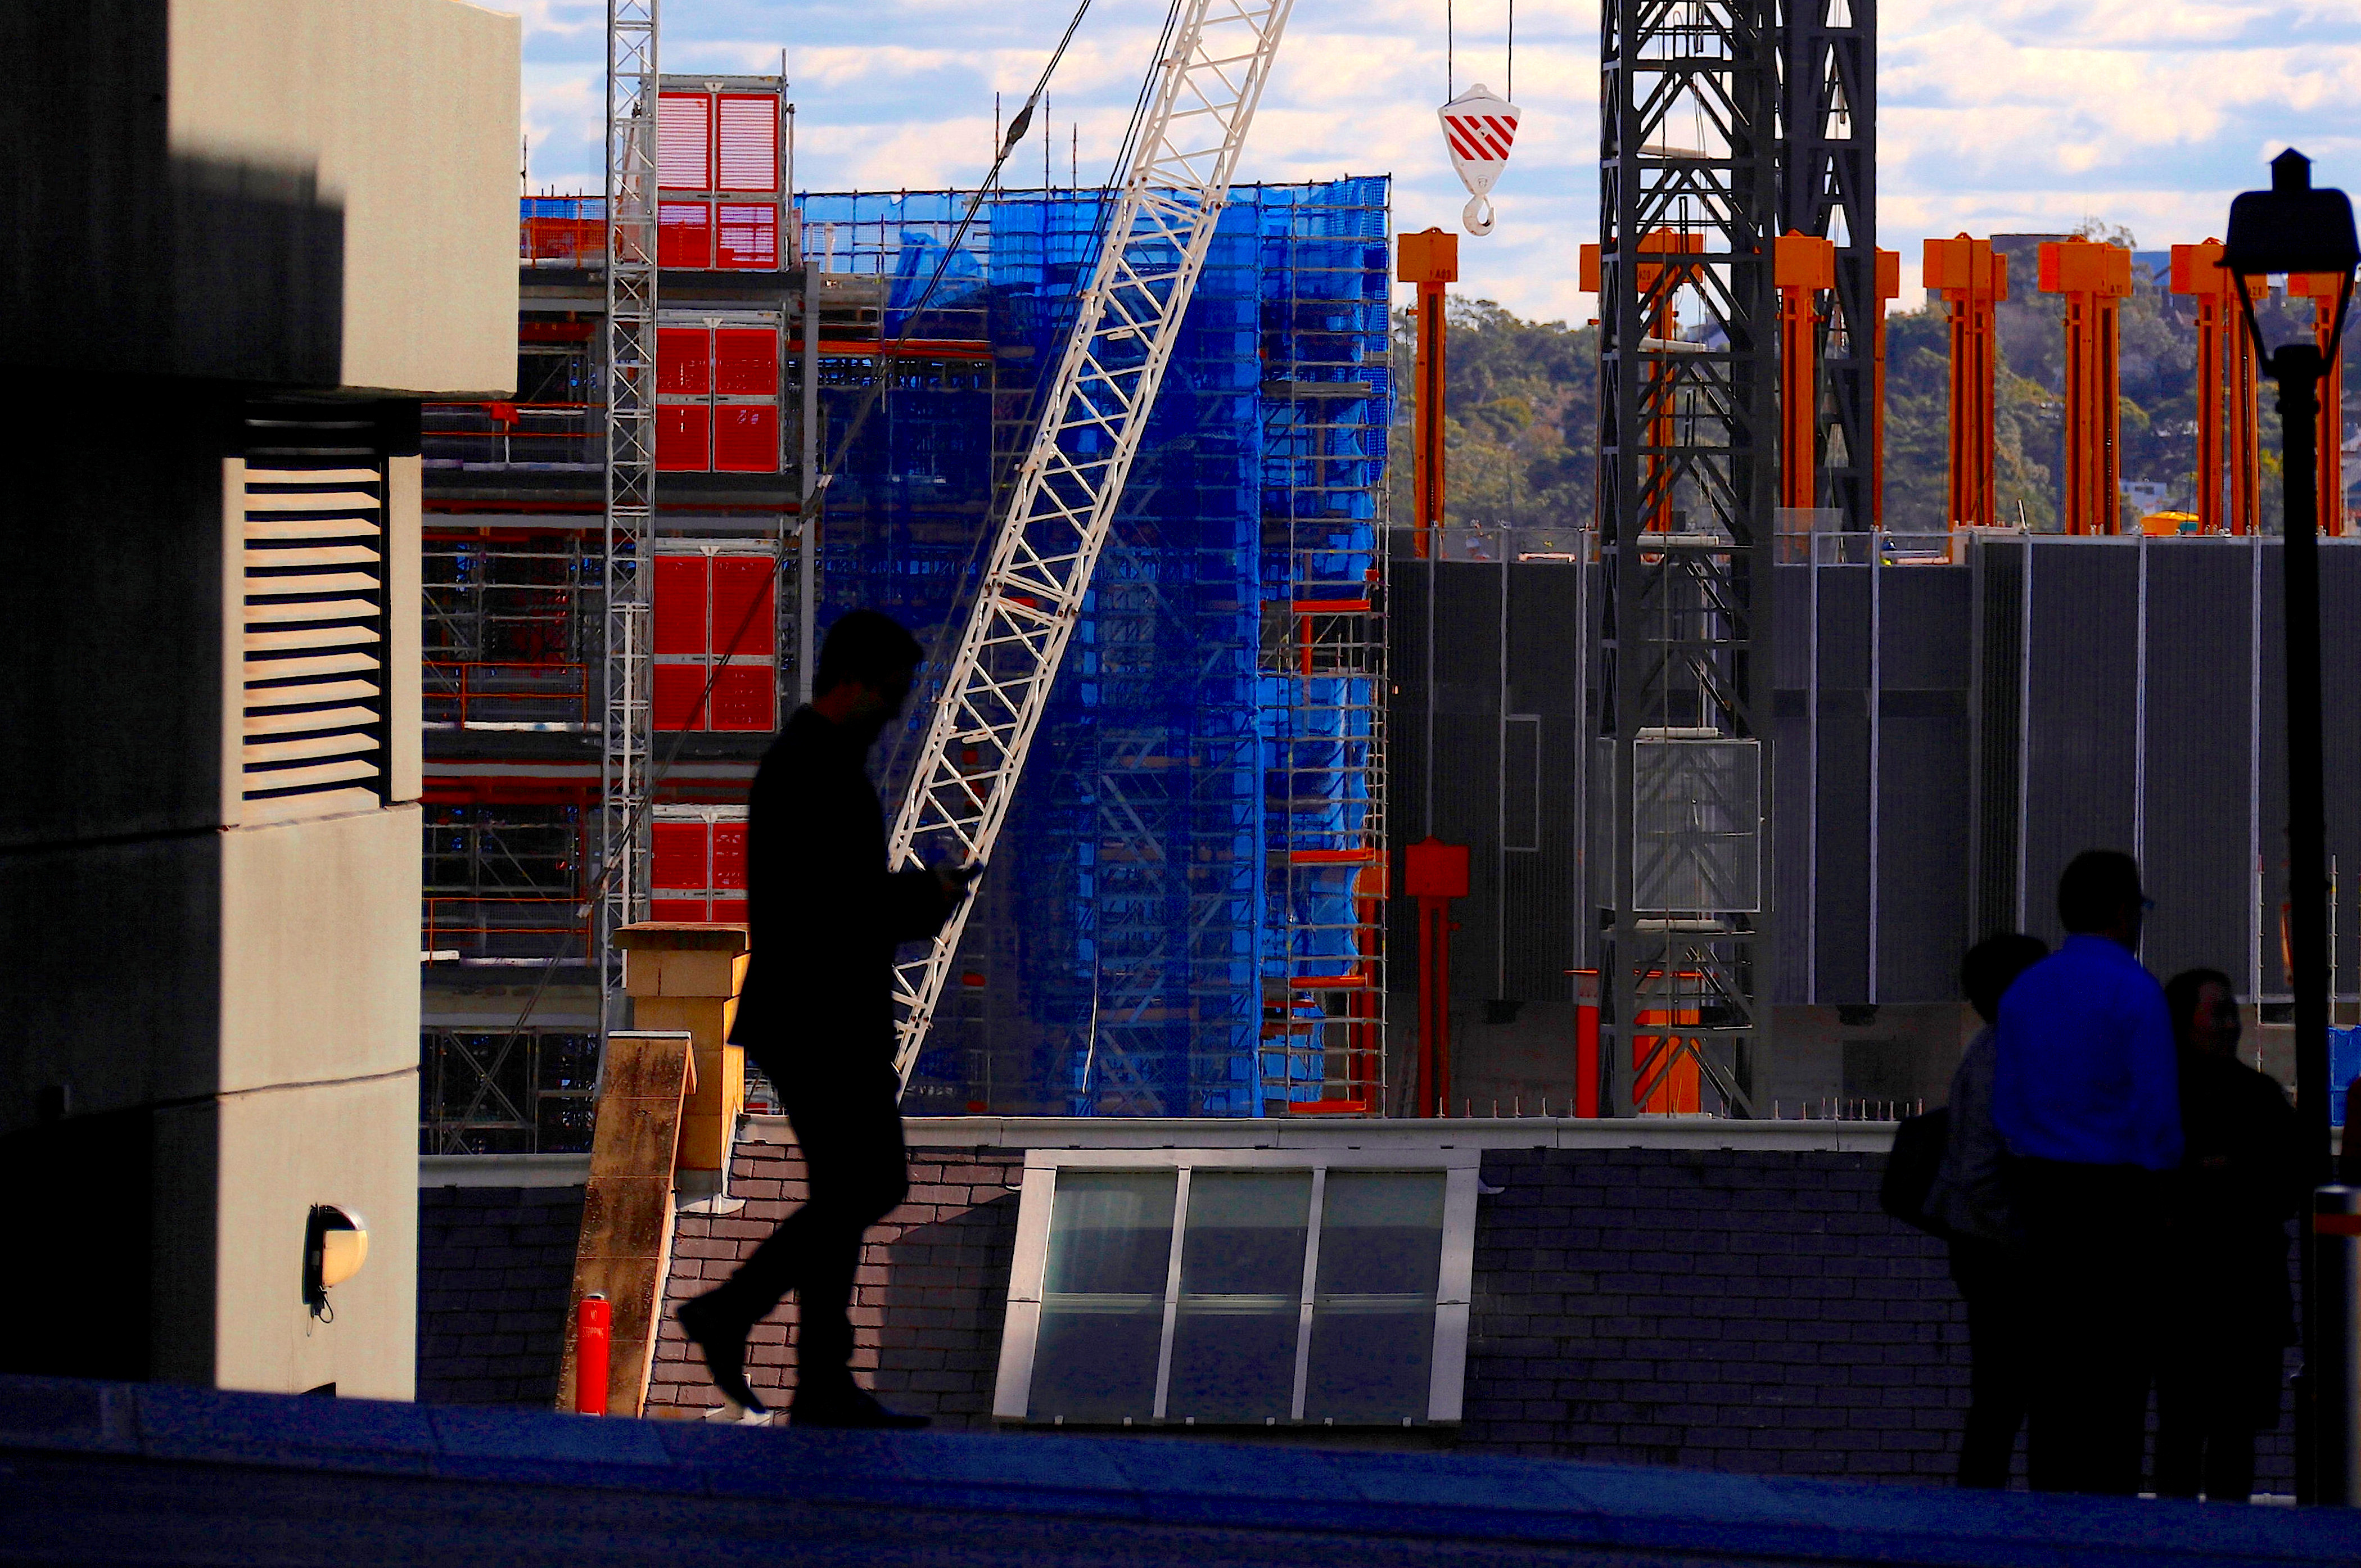 Pedestrians walk in front of a crane and scaffolding on a construction site in central Sydney